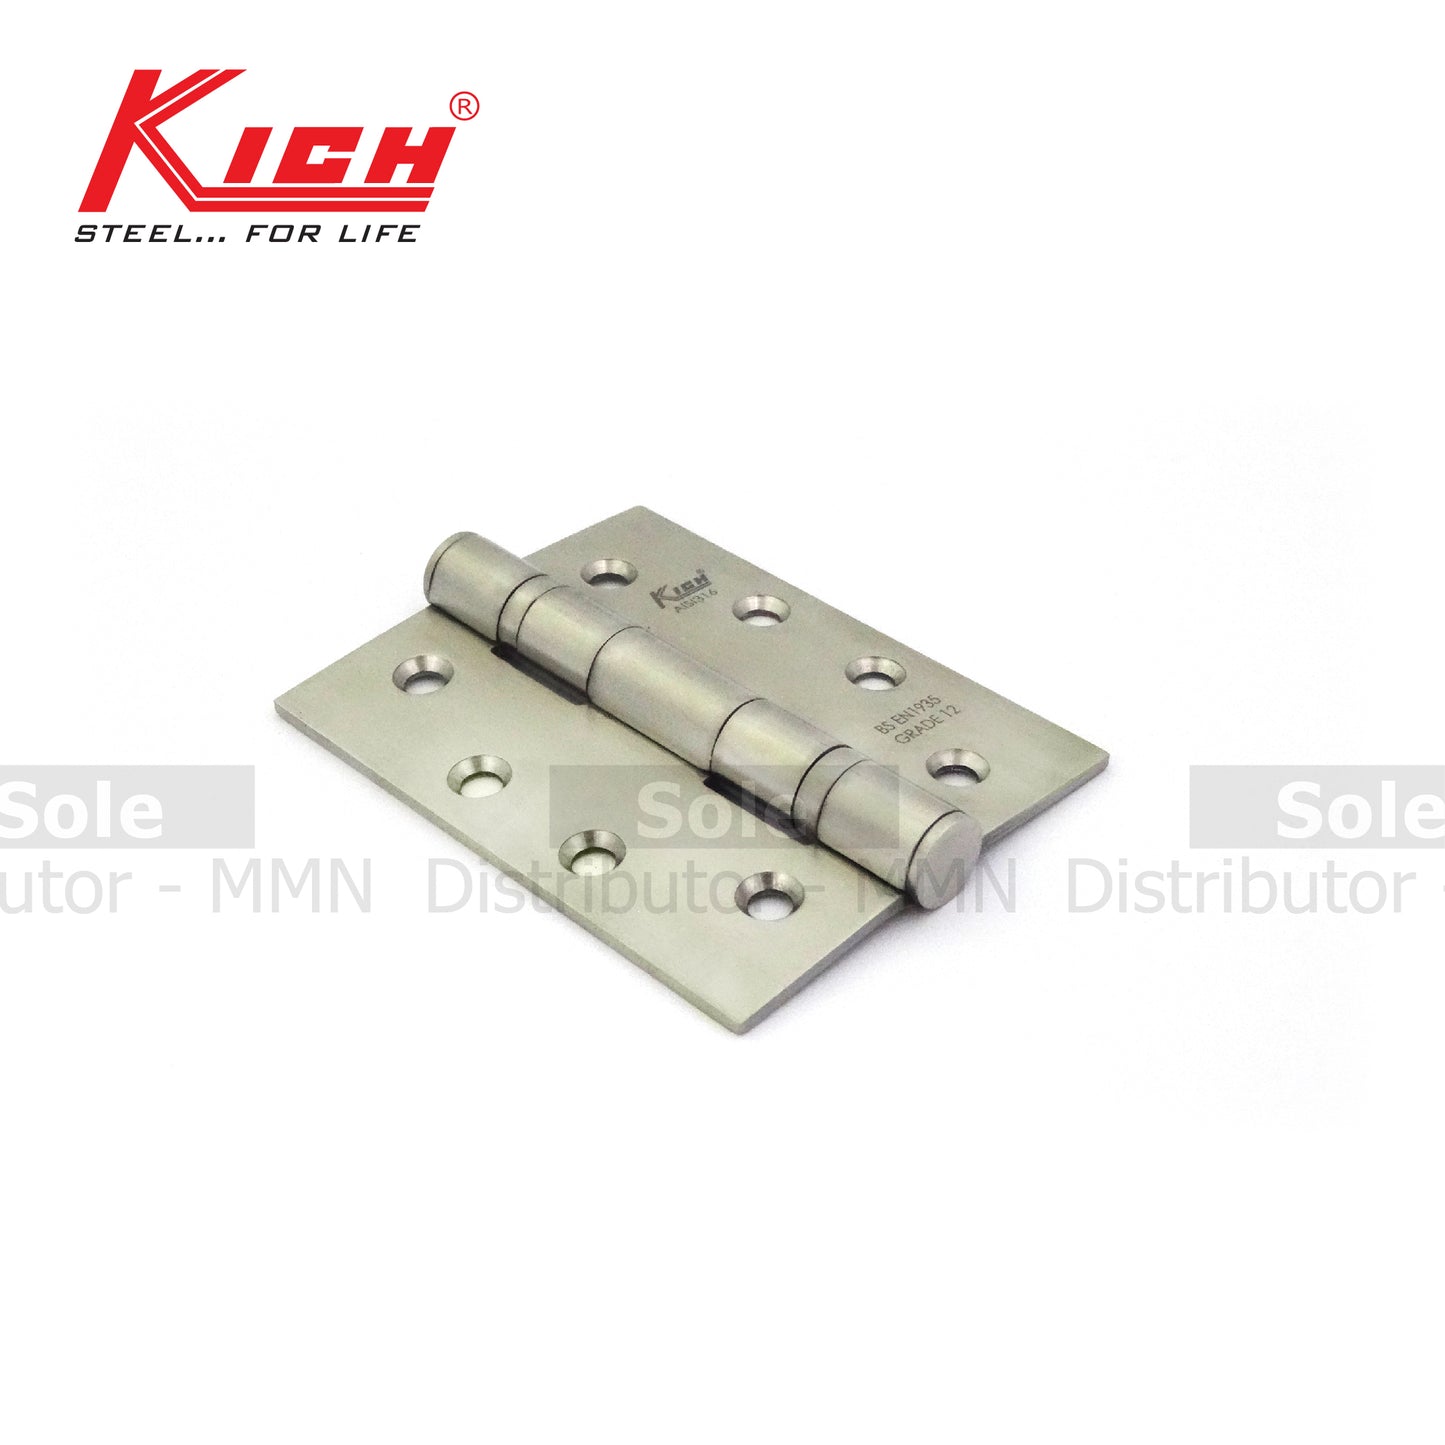 Kich Door Hinges With 2 Ball Bearing, Size 4x3 Inches, Stainless Steel 316 Grade (PRDH T 2-4)- K4X3SS